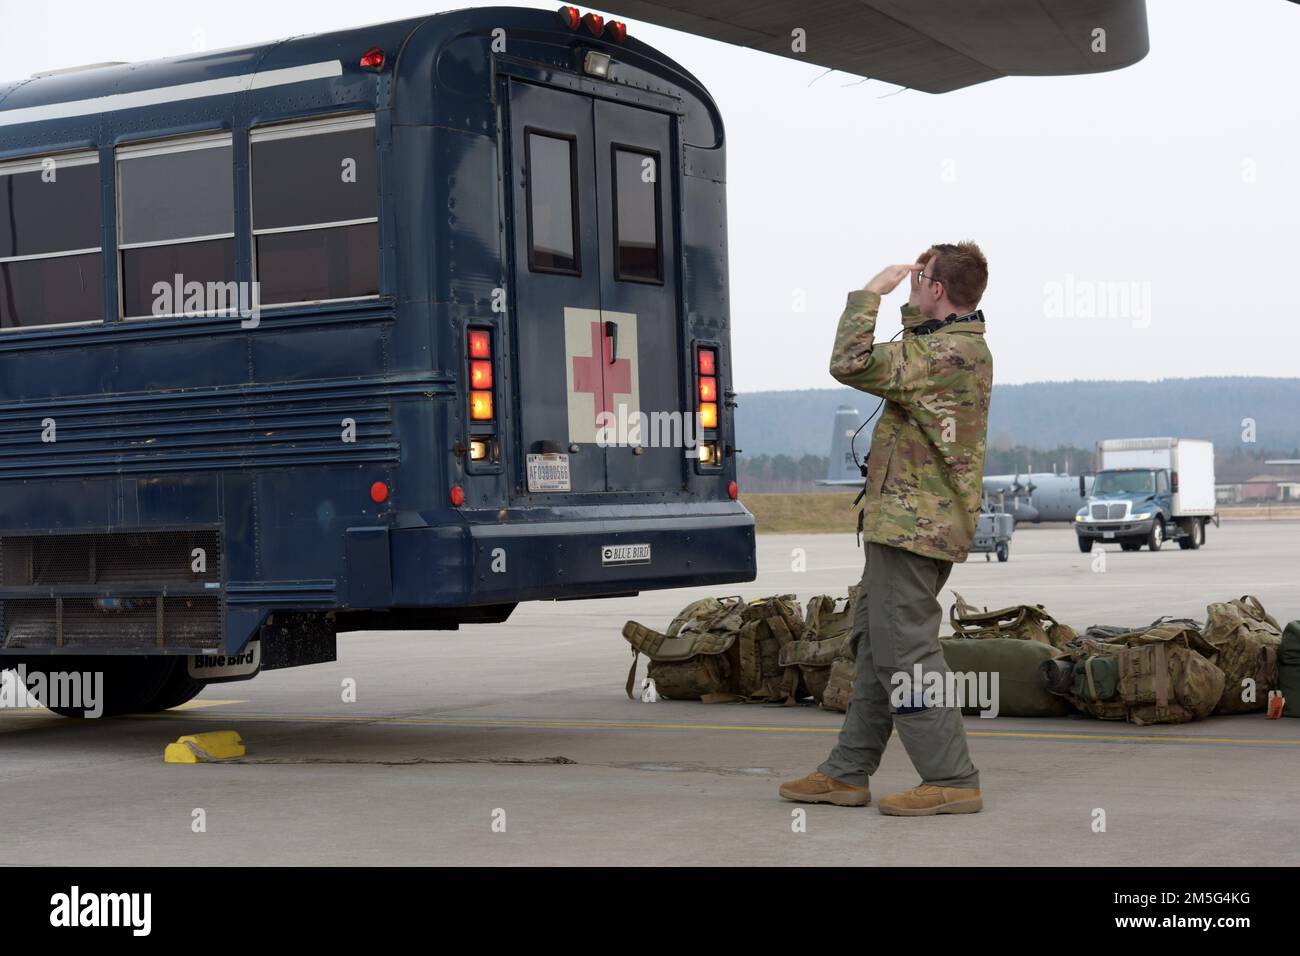 U.S. Air Force Senior Airman Zachary Glanz, 96th Airlift Squadron loadmaster, directs a medical bus at Ramstein Air Base, Germany, March 16, 2022. The 86th Aeromedical Evacuation Squadron and 86th Medical Group Critical Care Air Transport Teams flew with deployed members of the 96th AS to Poland to transport eight U.S. patients, who were then taken to Landstuhl Regional Medical Center shortly after landing. The 86th Airlift Wing supports several aeromedical evacuation capabilities including the 86th Medical Squadron’s Critical Care Air Transport Team, 86th Aeromedical Evacuation Squadron, and Stock Photo